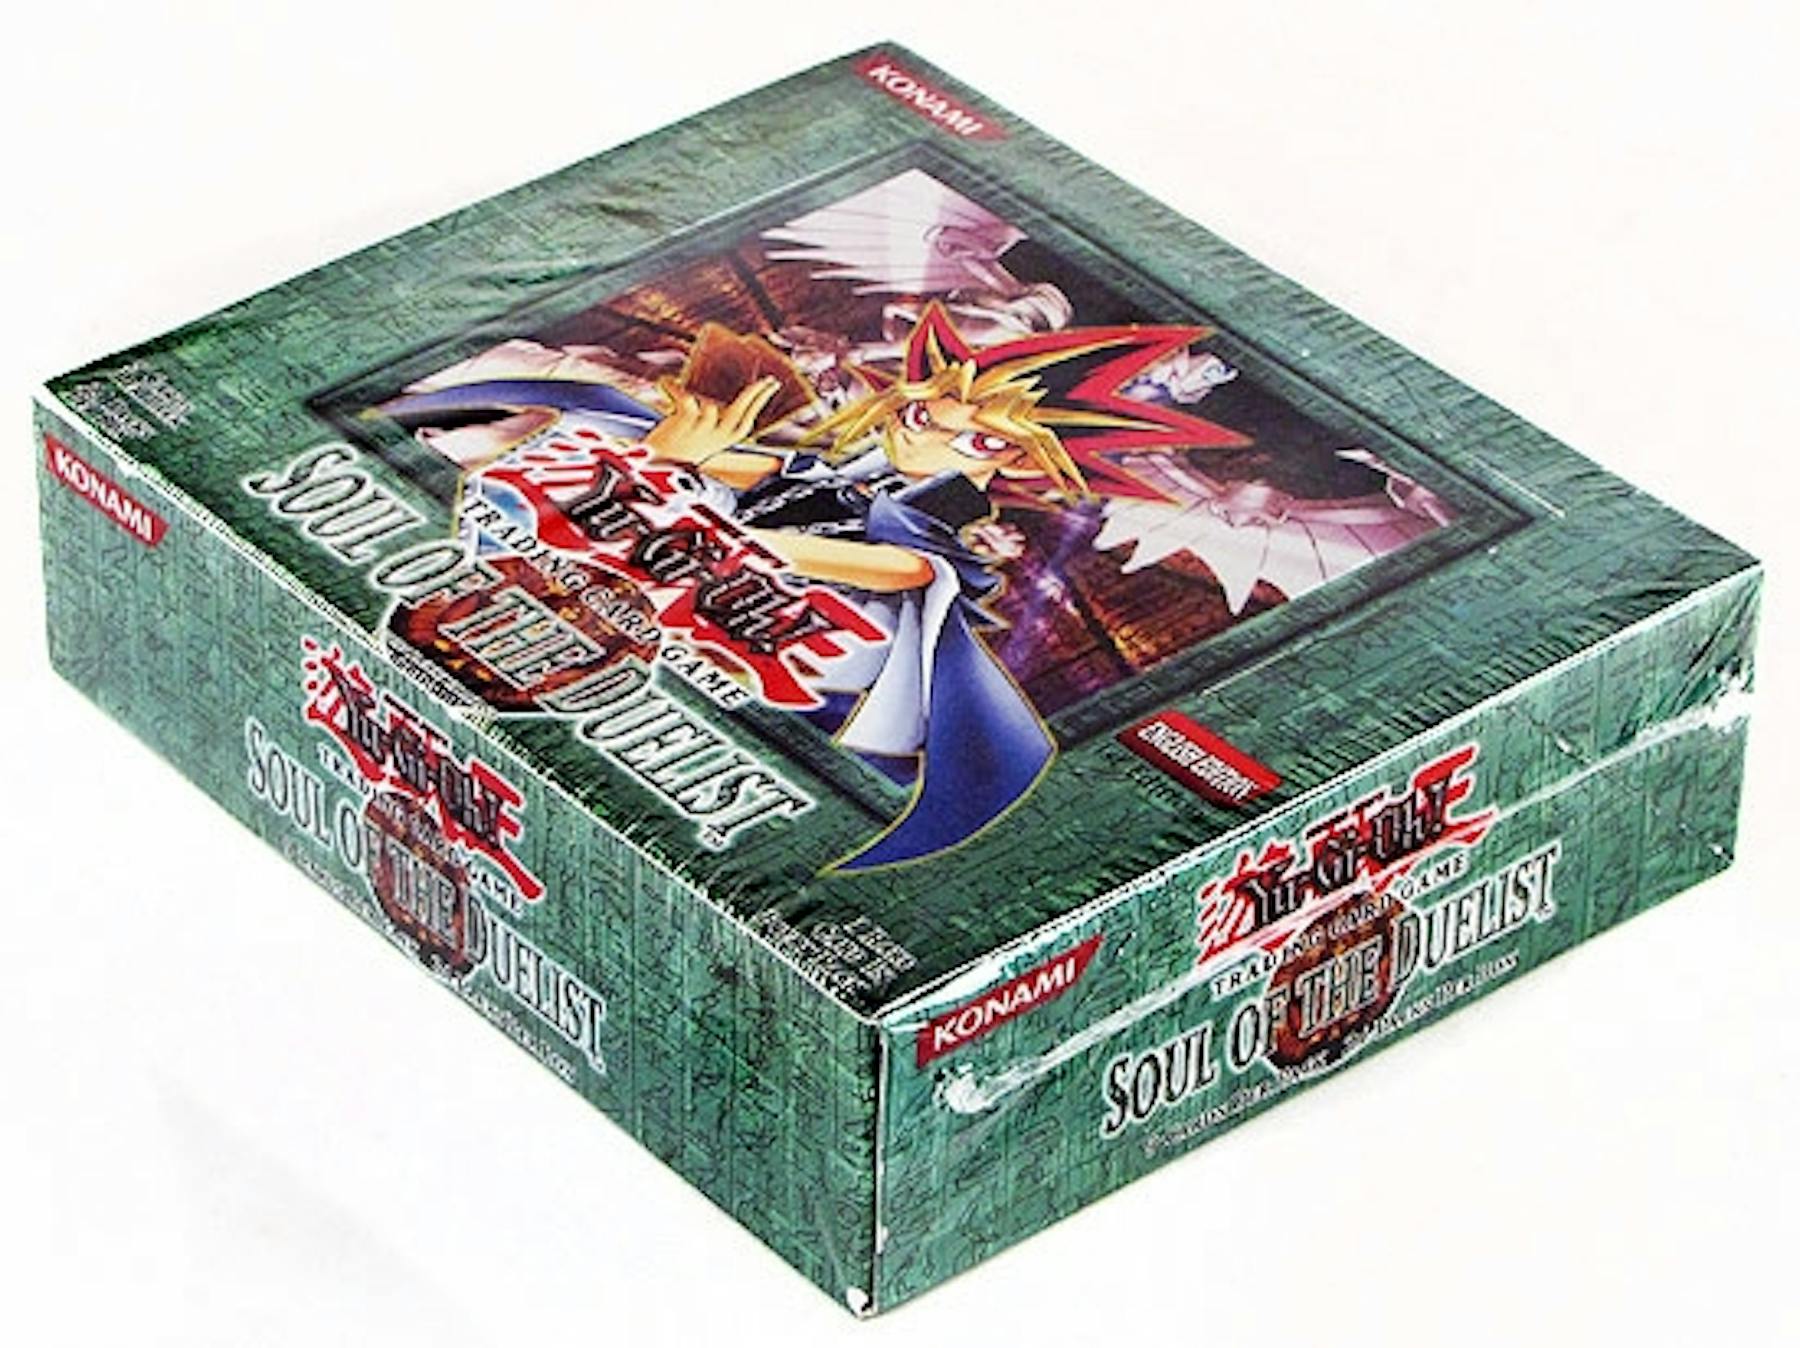 Yu-Gi-Oh Soul of the Duelist 1st Edition Booster Box